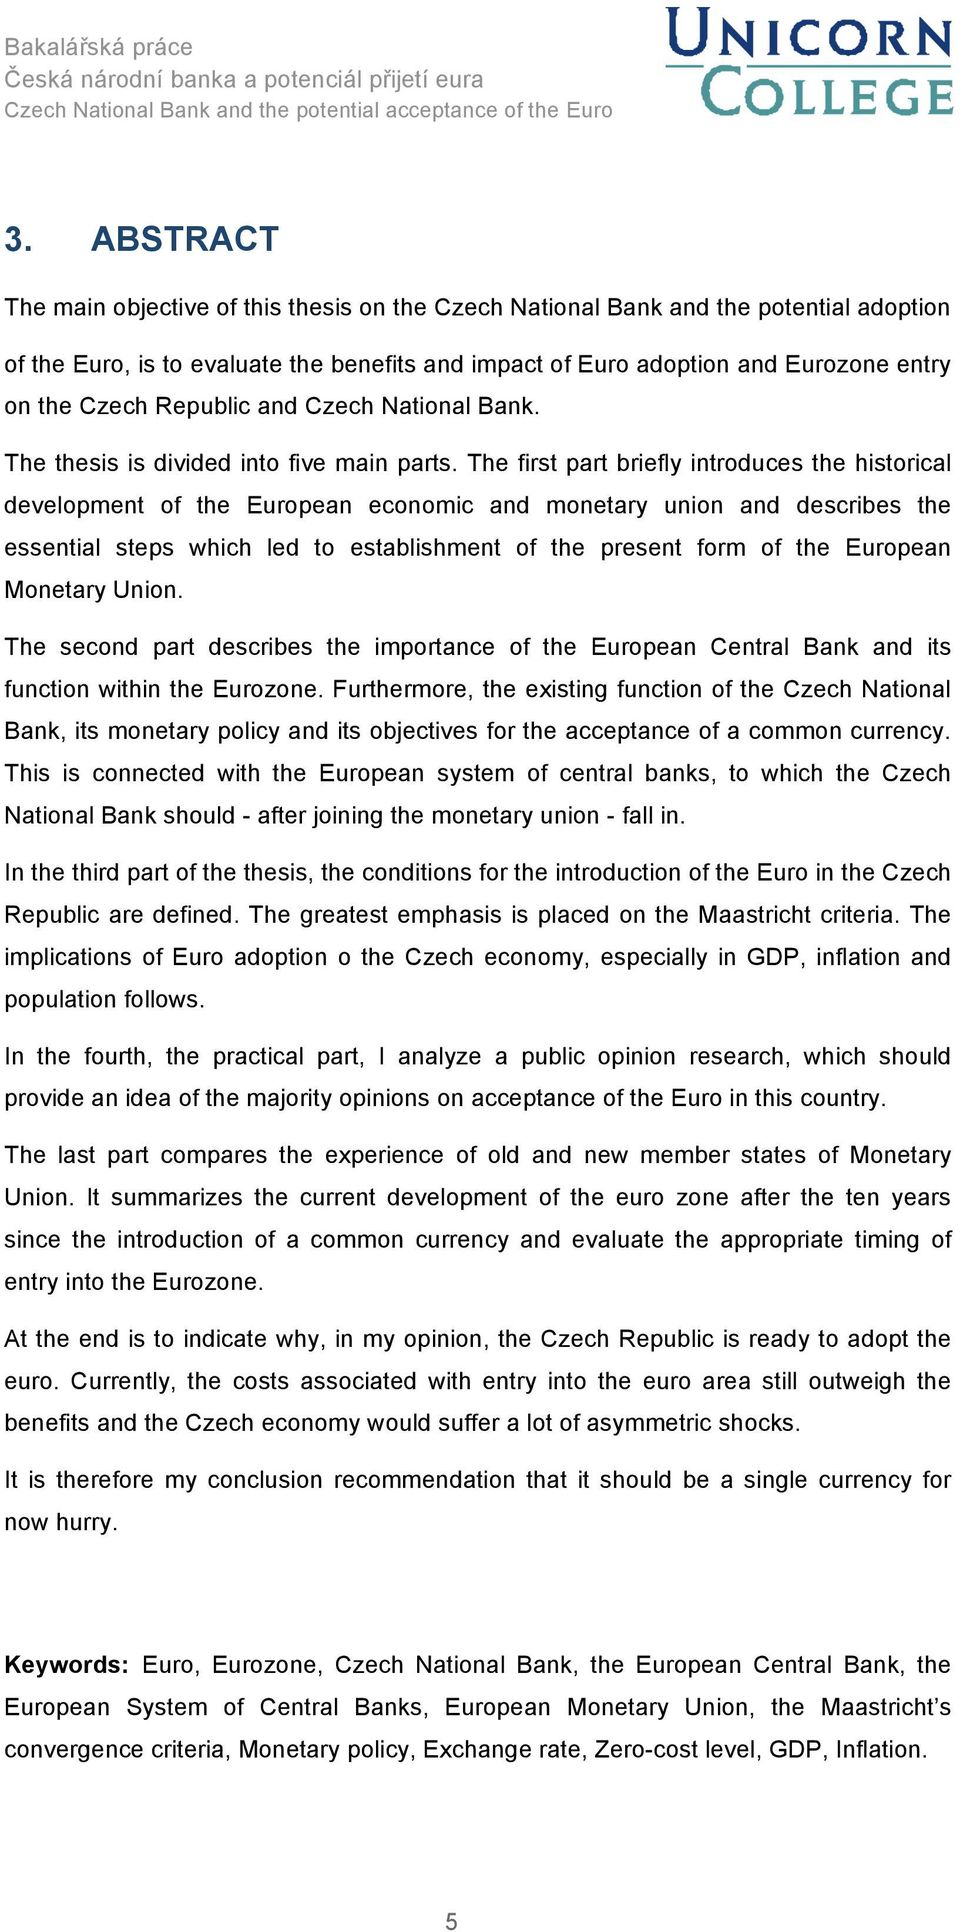 The first part briefly introduces the historical development of the European economic and monetary union and describes the essential steps which led to establishment of the present form of the